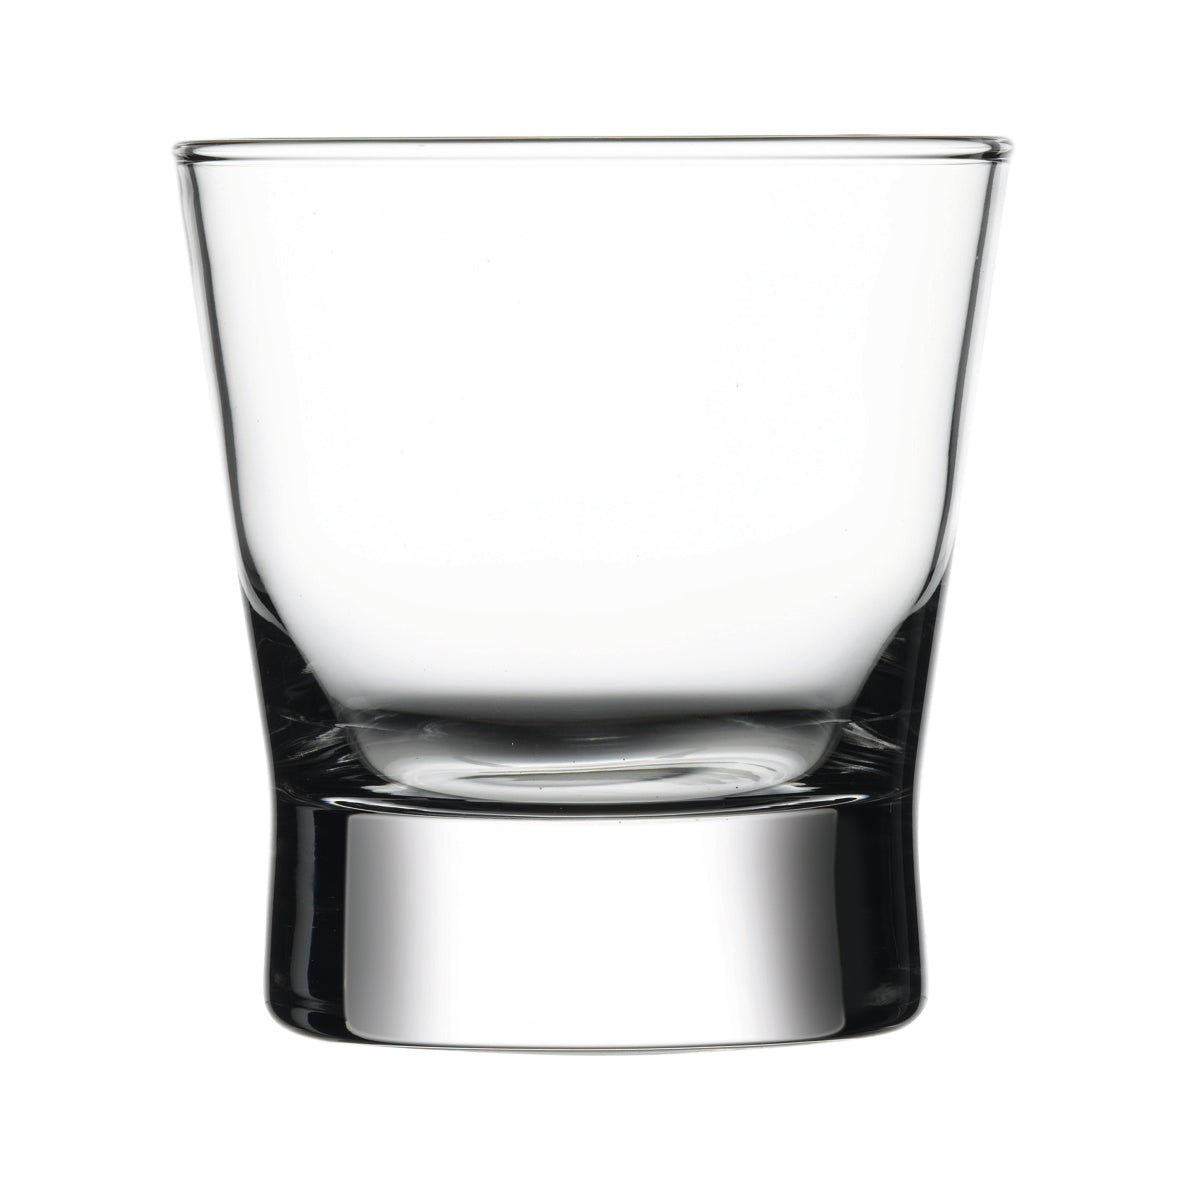 PETRA OLD FASHIONED SHORT GLASS - 10.5 OZ/ 300 CC - Mabrook Hotel Supplies